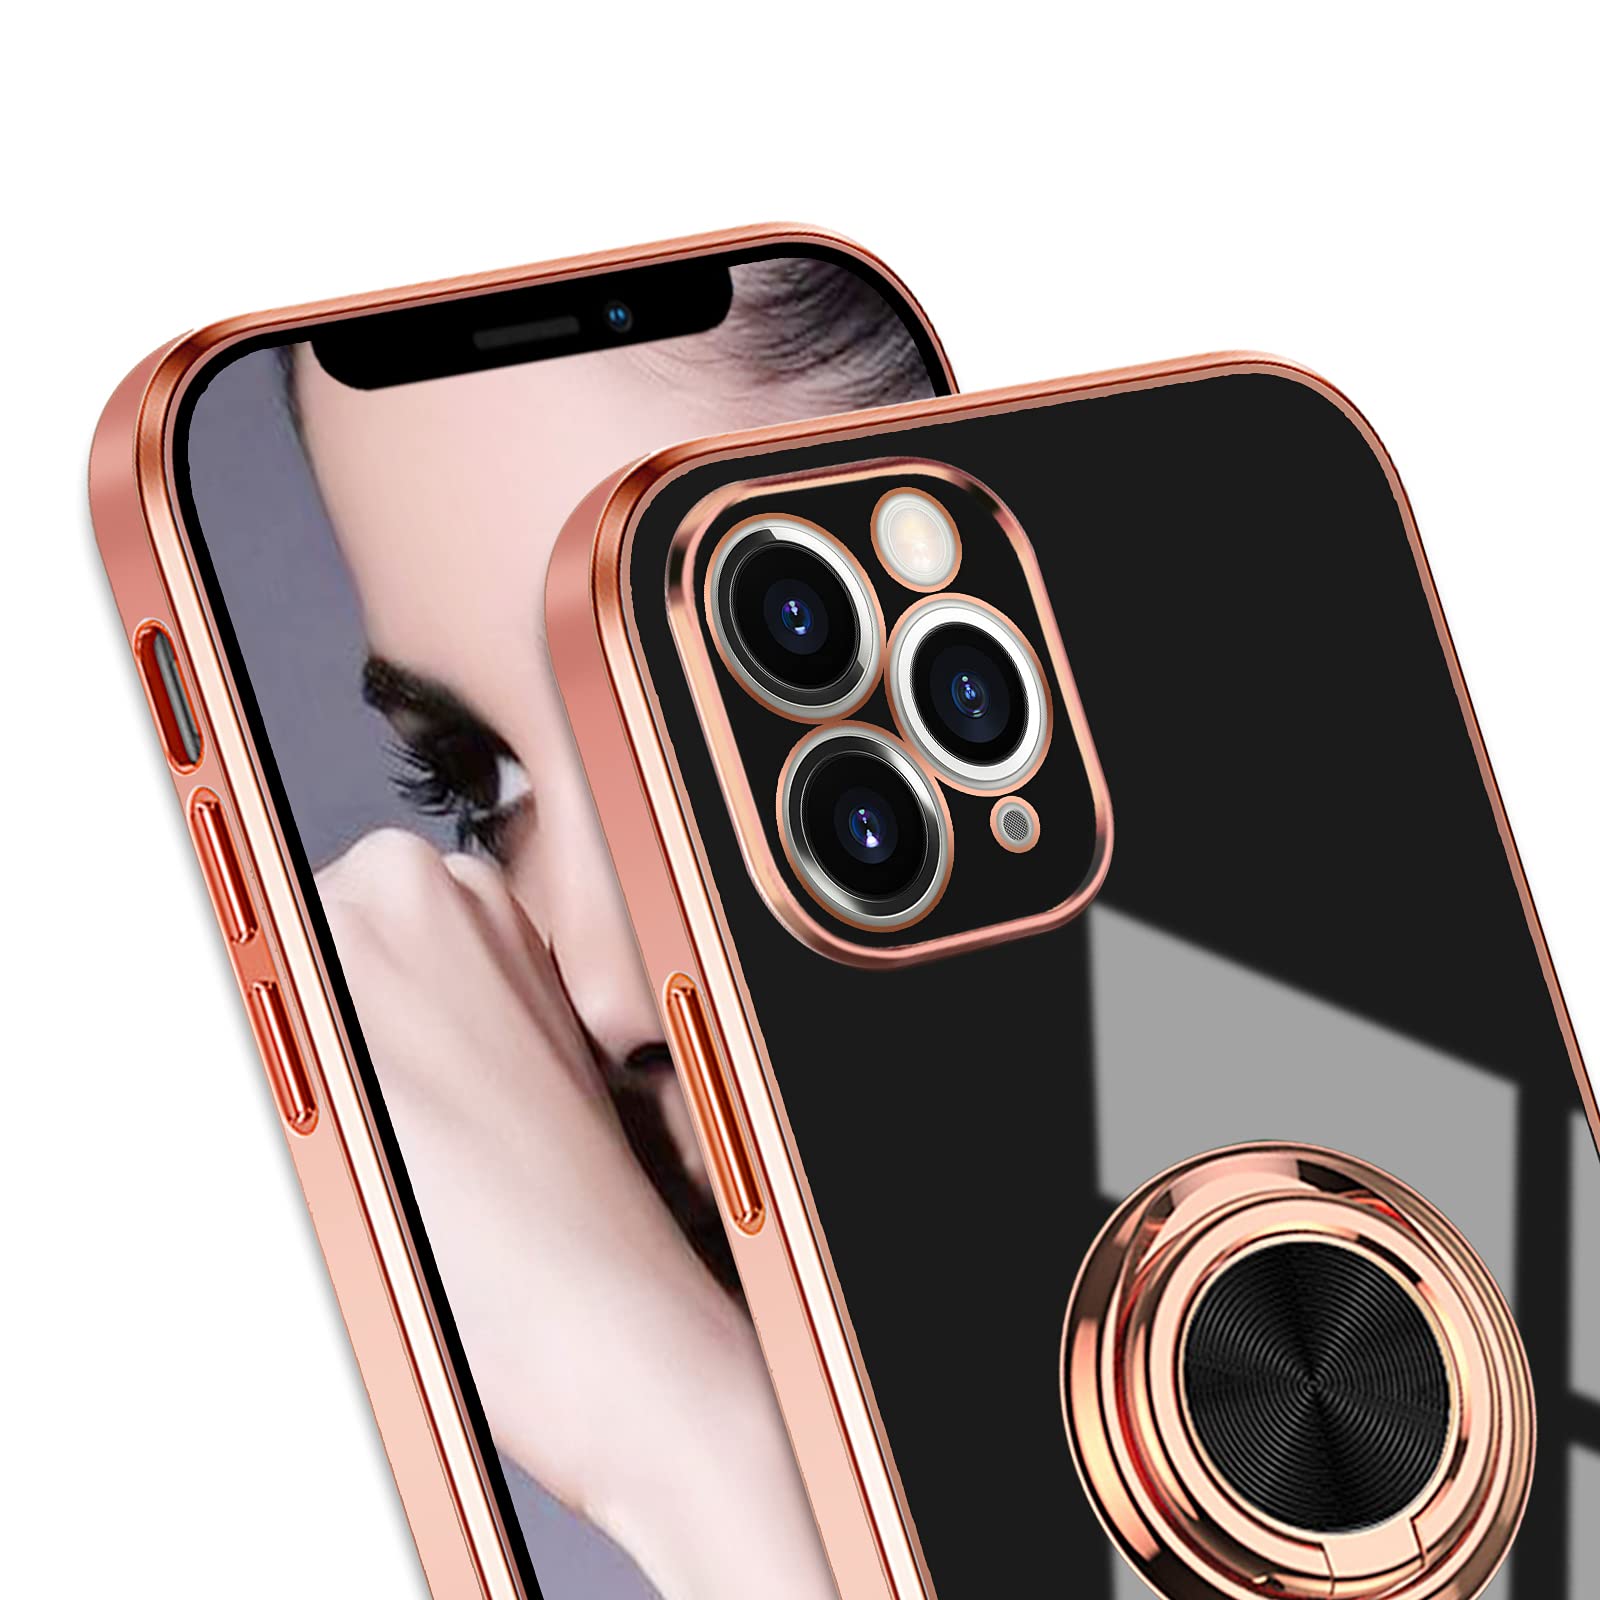 Omorro for Case iPhone 11 Pro Max Case for Women with Ring Holder, 360 Degree Rotation Kickstand Girly Cases Bling Glitter Plating Rose Gold Slim Soft Luxury Protective Cover Cases for Girls Black